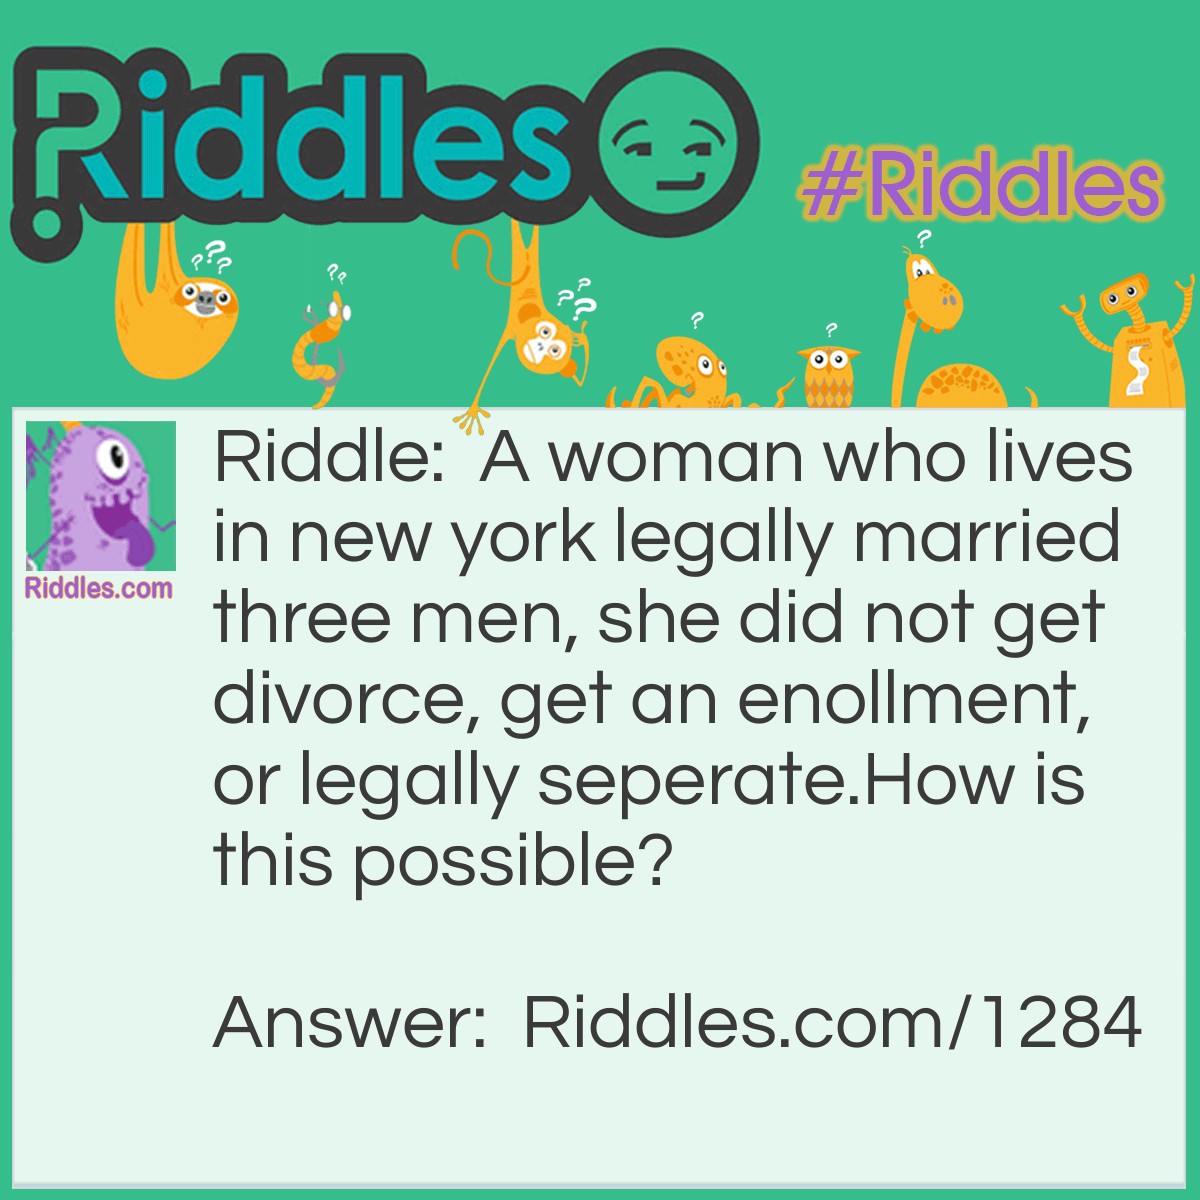 Riddle: A woman who lives in new york legally married three men, she did not get divorce, get an enollment, or legally seperate.
How is this possible? Answer: She is a minister.